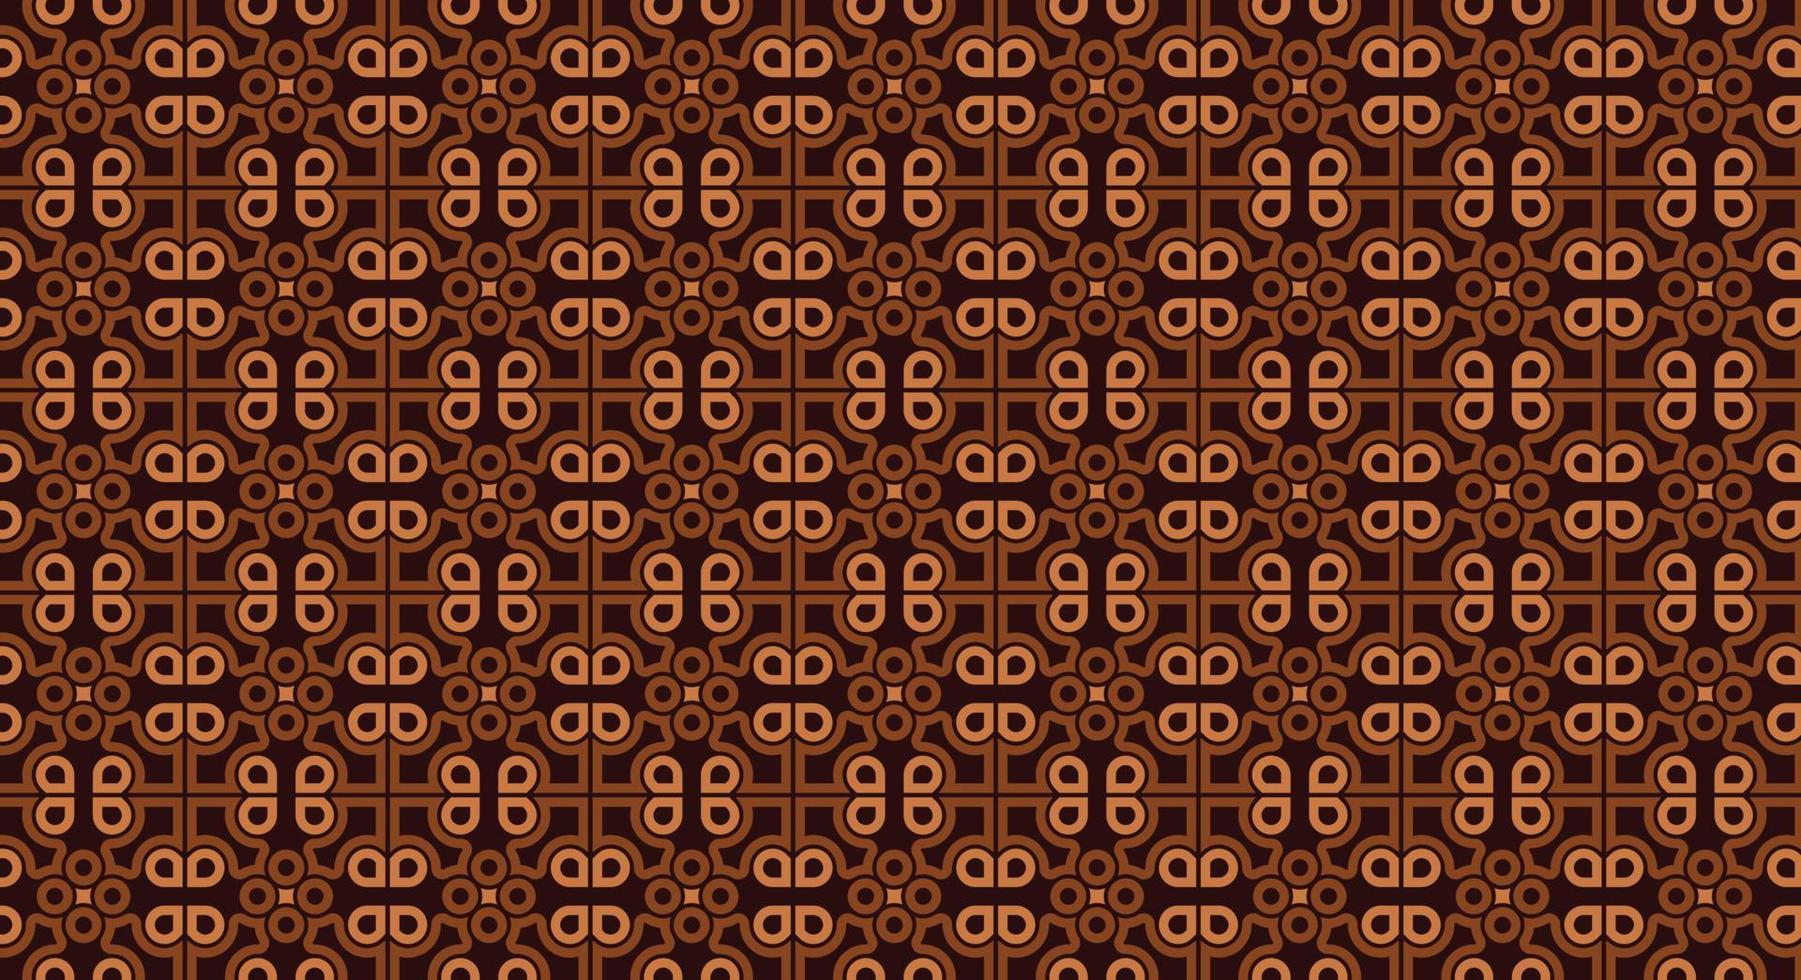 elegant brown abstract pattern background vector